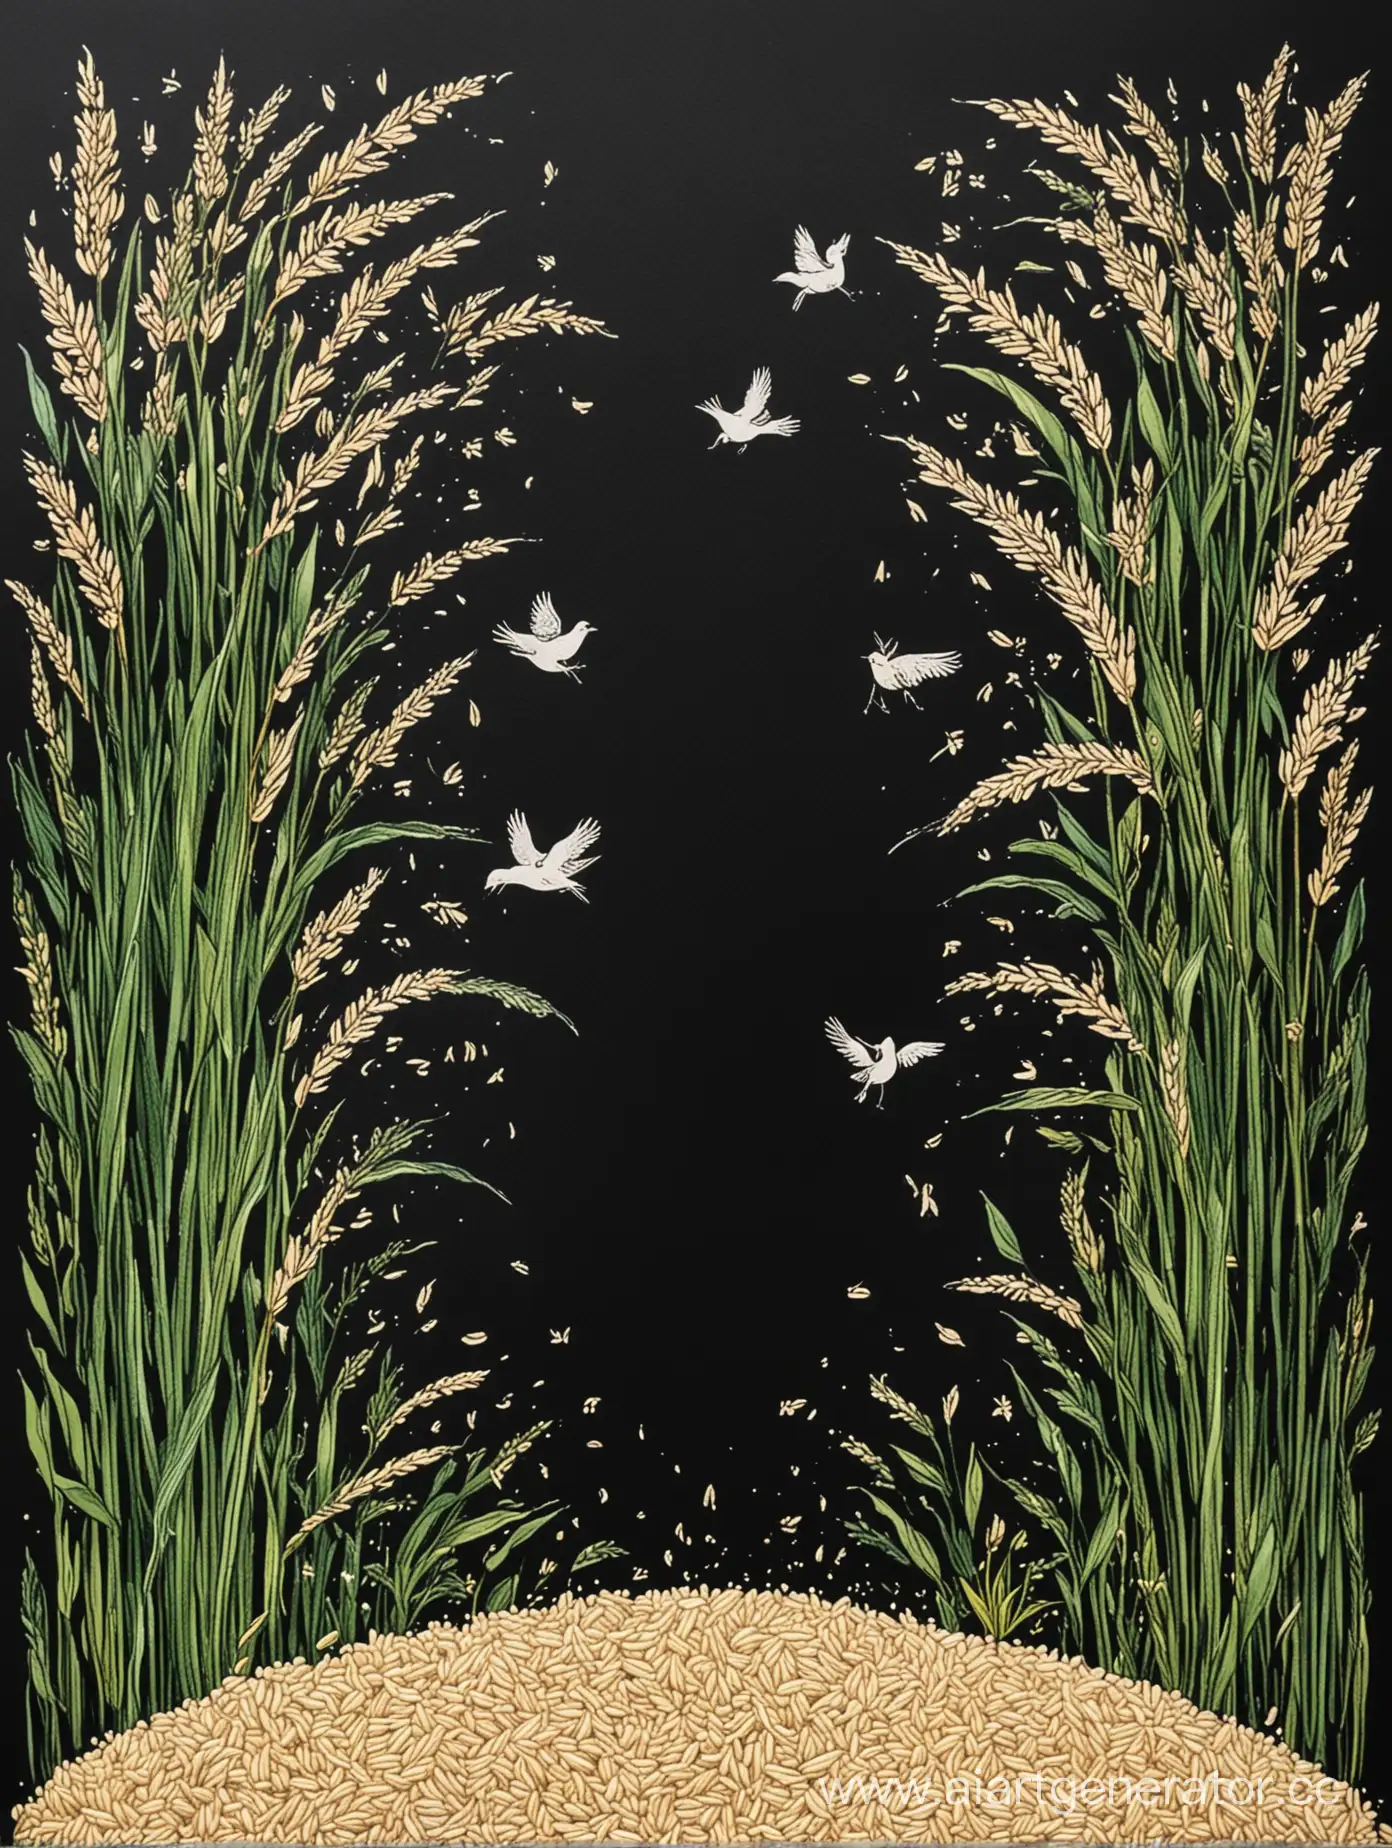 Sprouting-Rice-Field-Poster-with-Birds